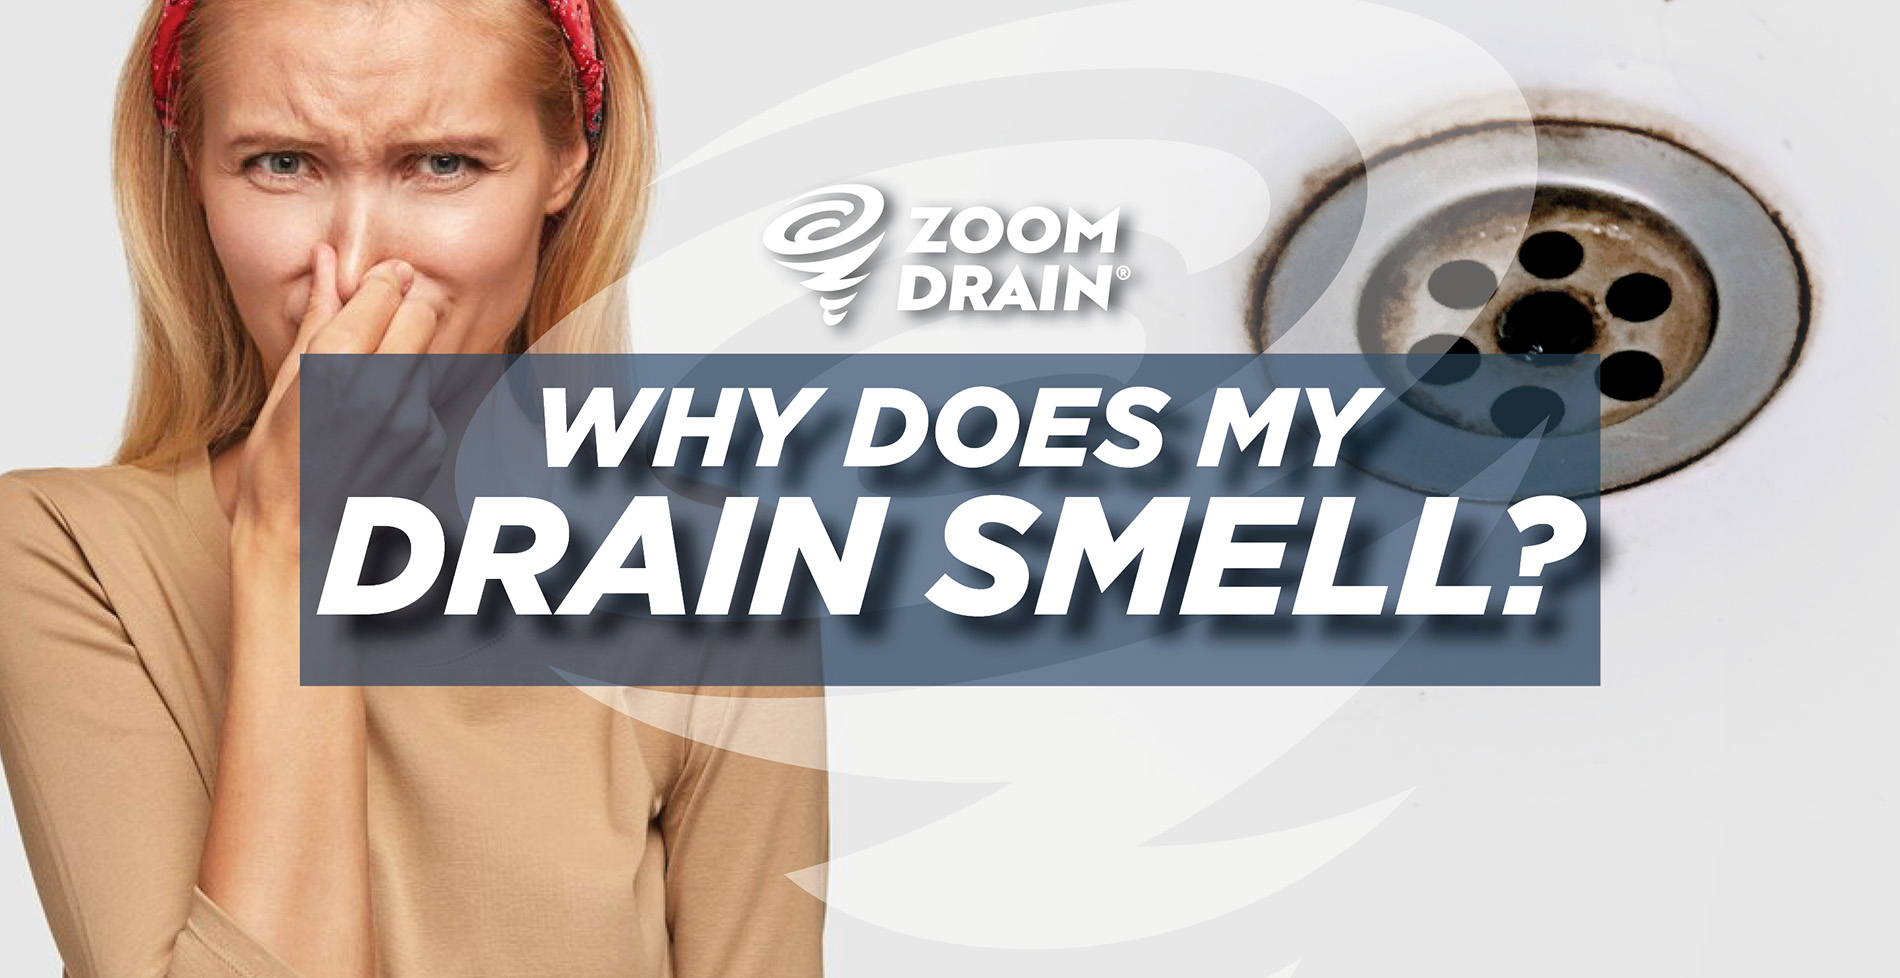 What's Causing That Strong Rotten Egg Smell That's Coming From My Drain?